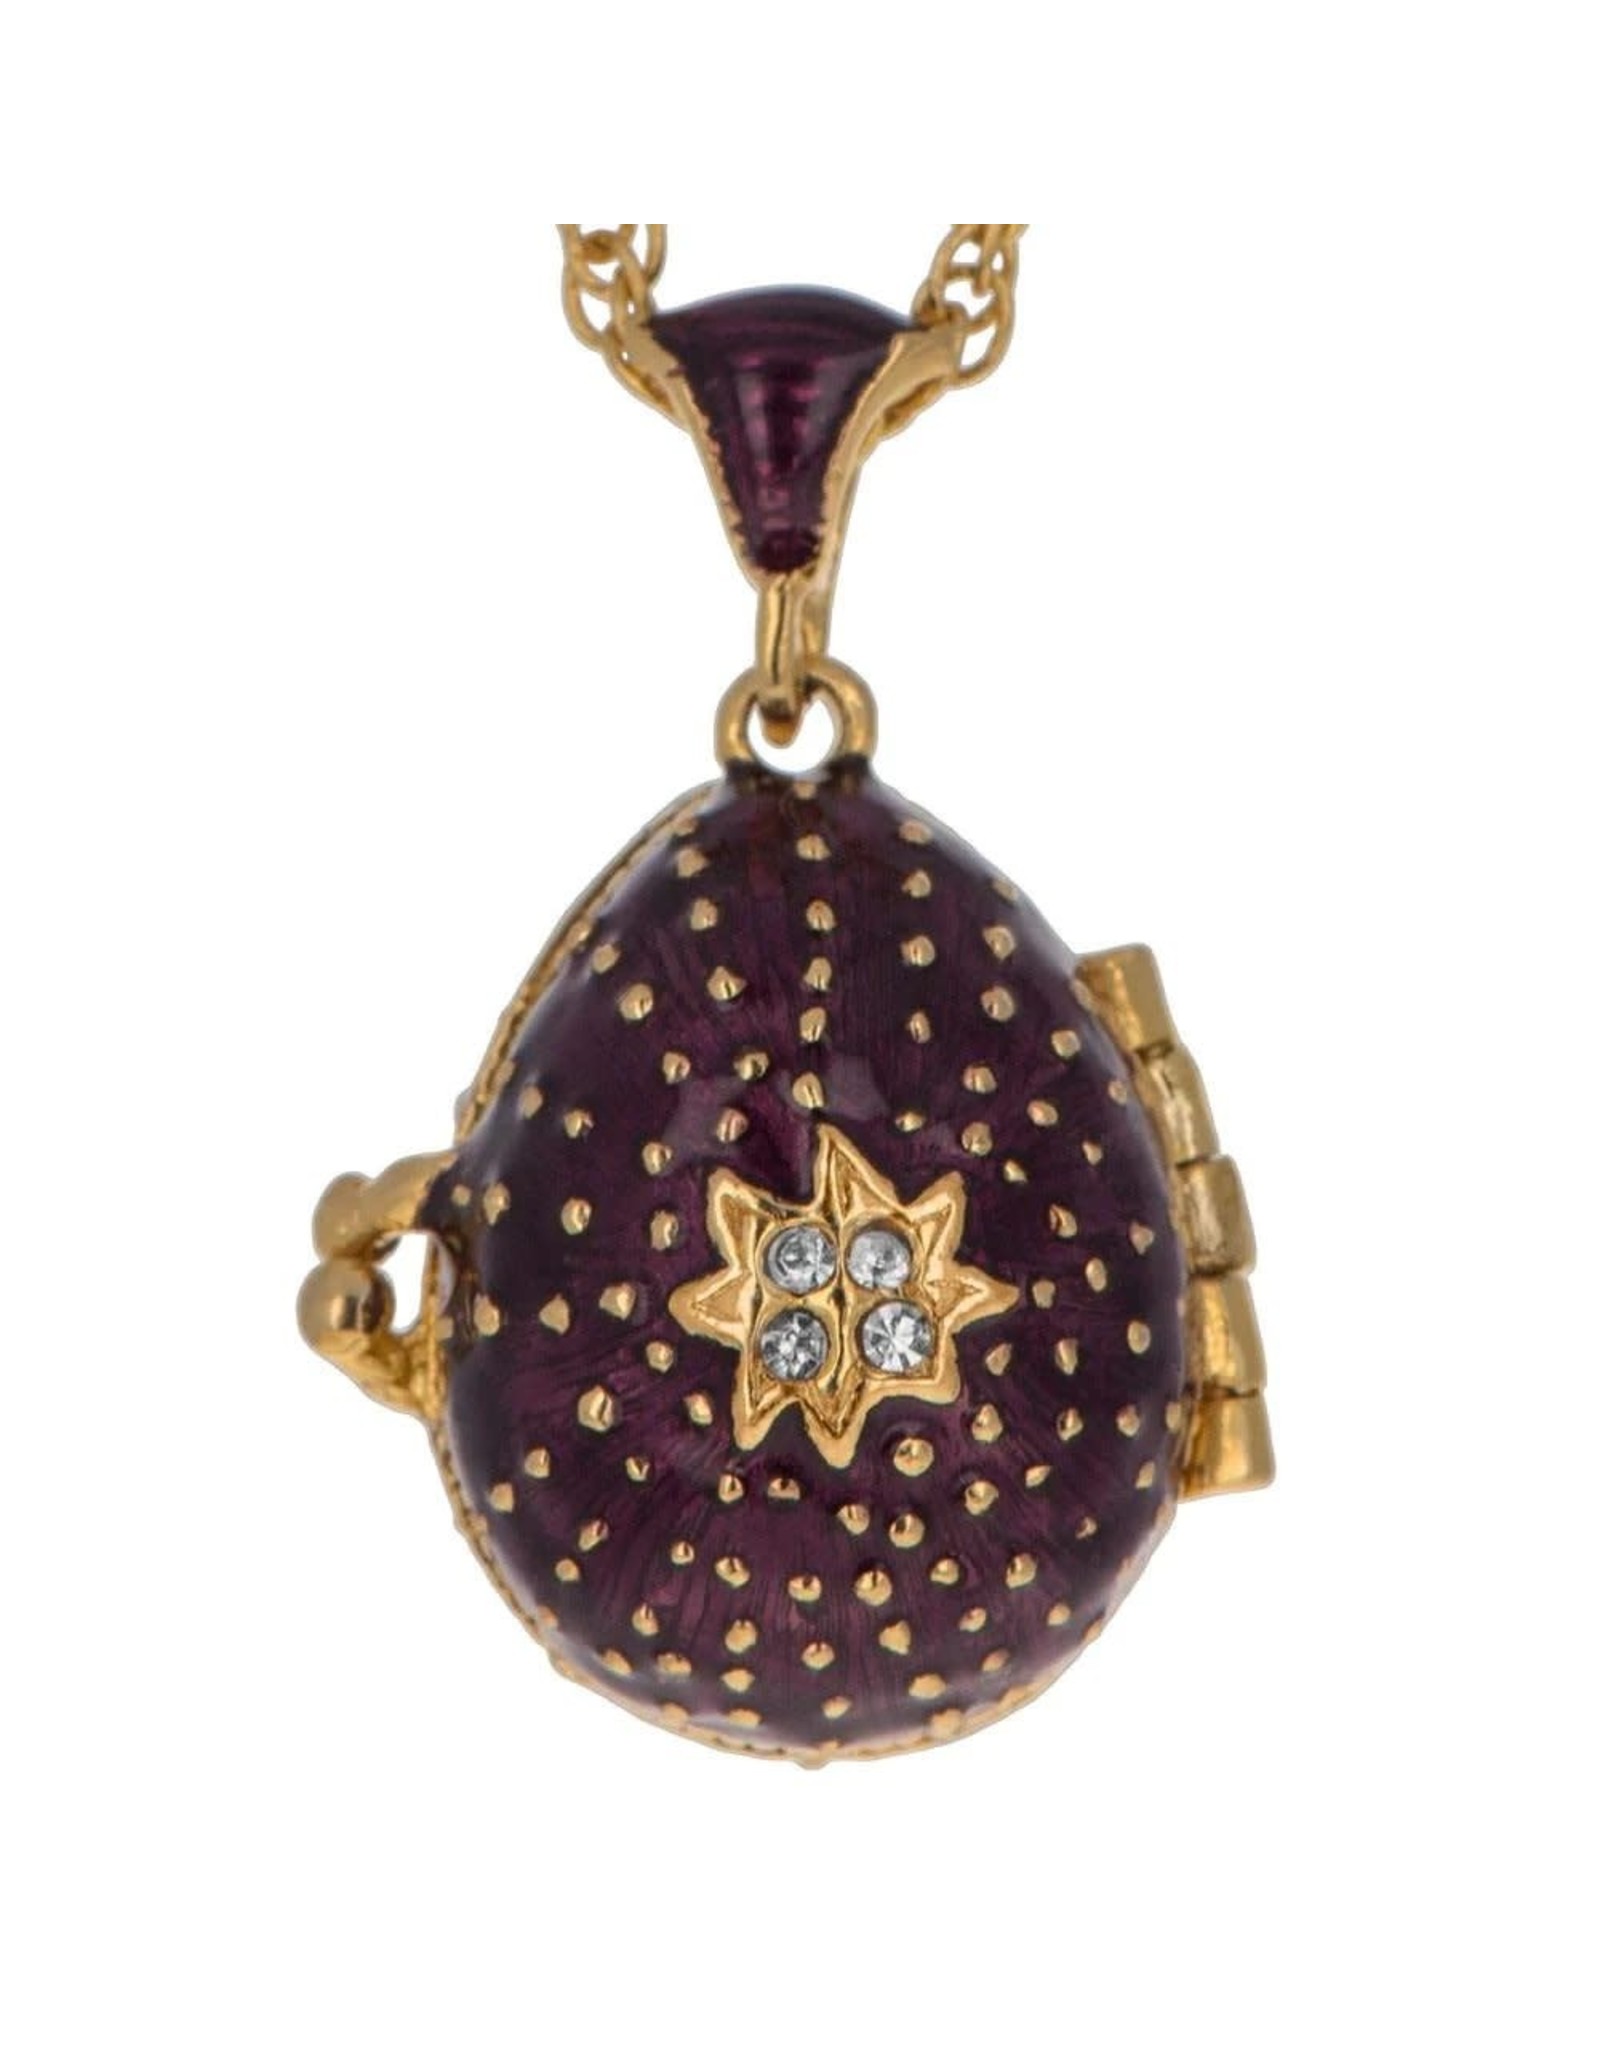 Imperial Egg Pendant Necklace "Crystal Cross"